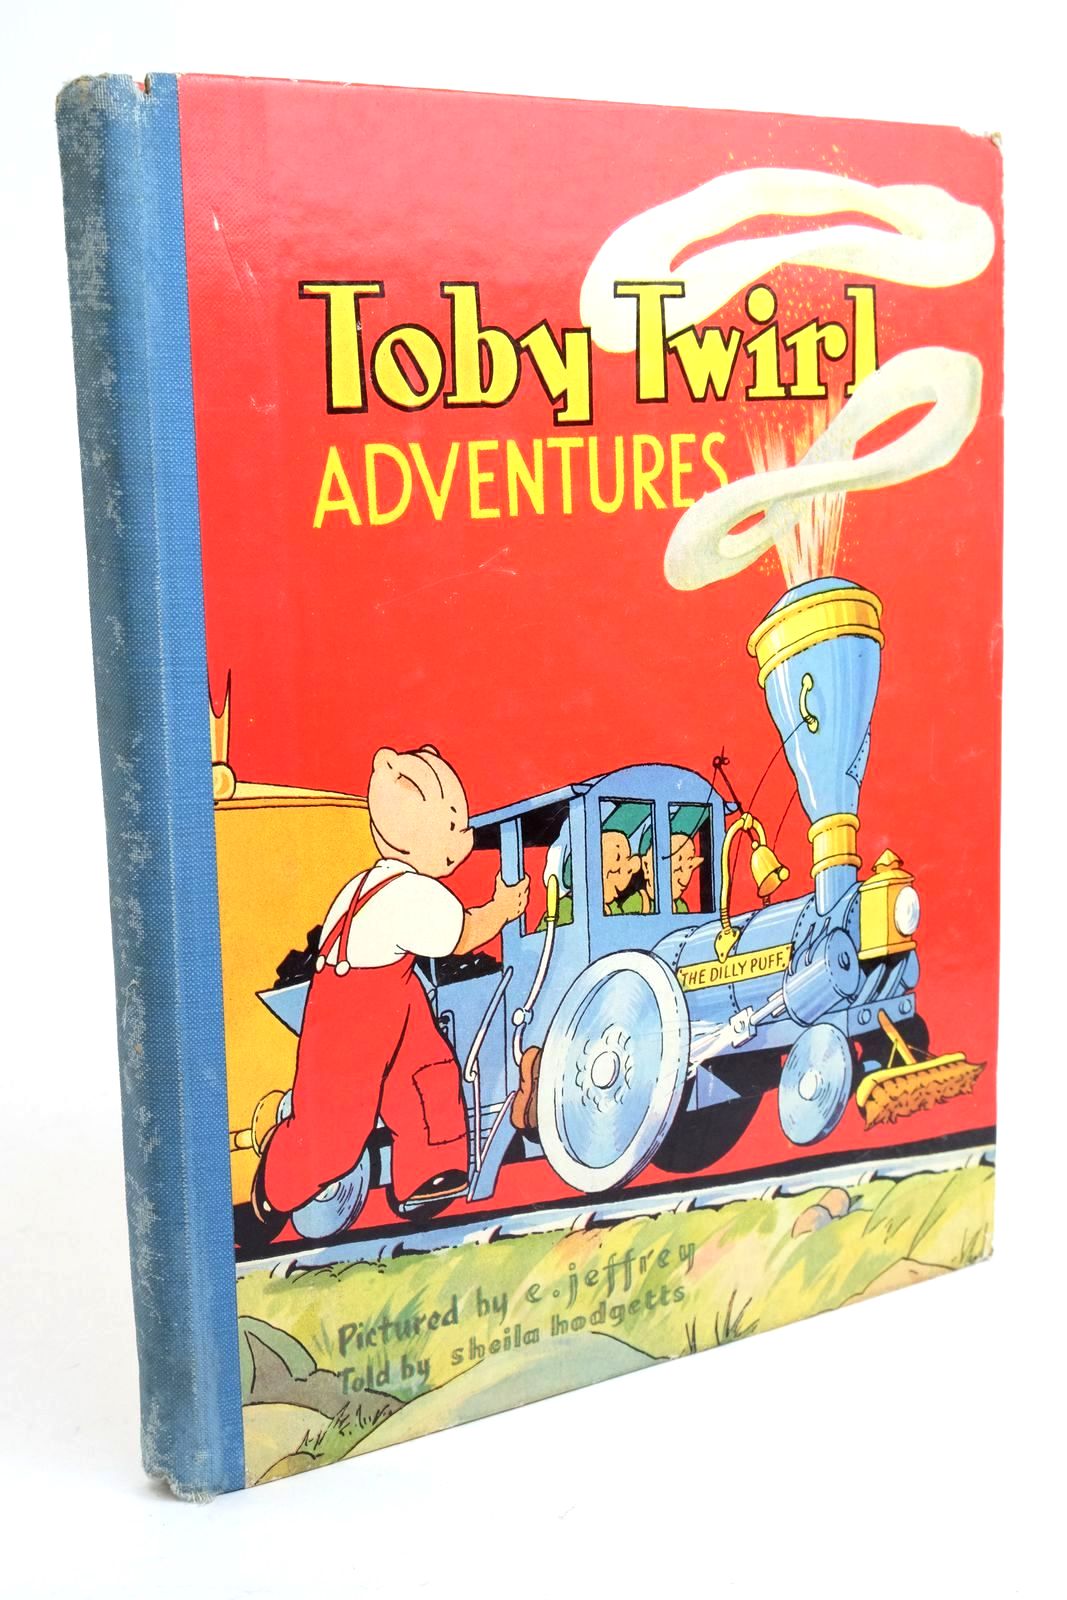 Photo of TOBY TWIRL ADVENTURES written by Hodgetts, Sheila illustrated by Jeffrey, E. published by Sampson Low, Marston &amp; Co. Ltd. (STOCK CODE: 1322171)  for sale by Stella & Rose's Books